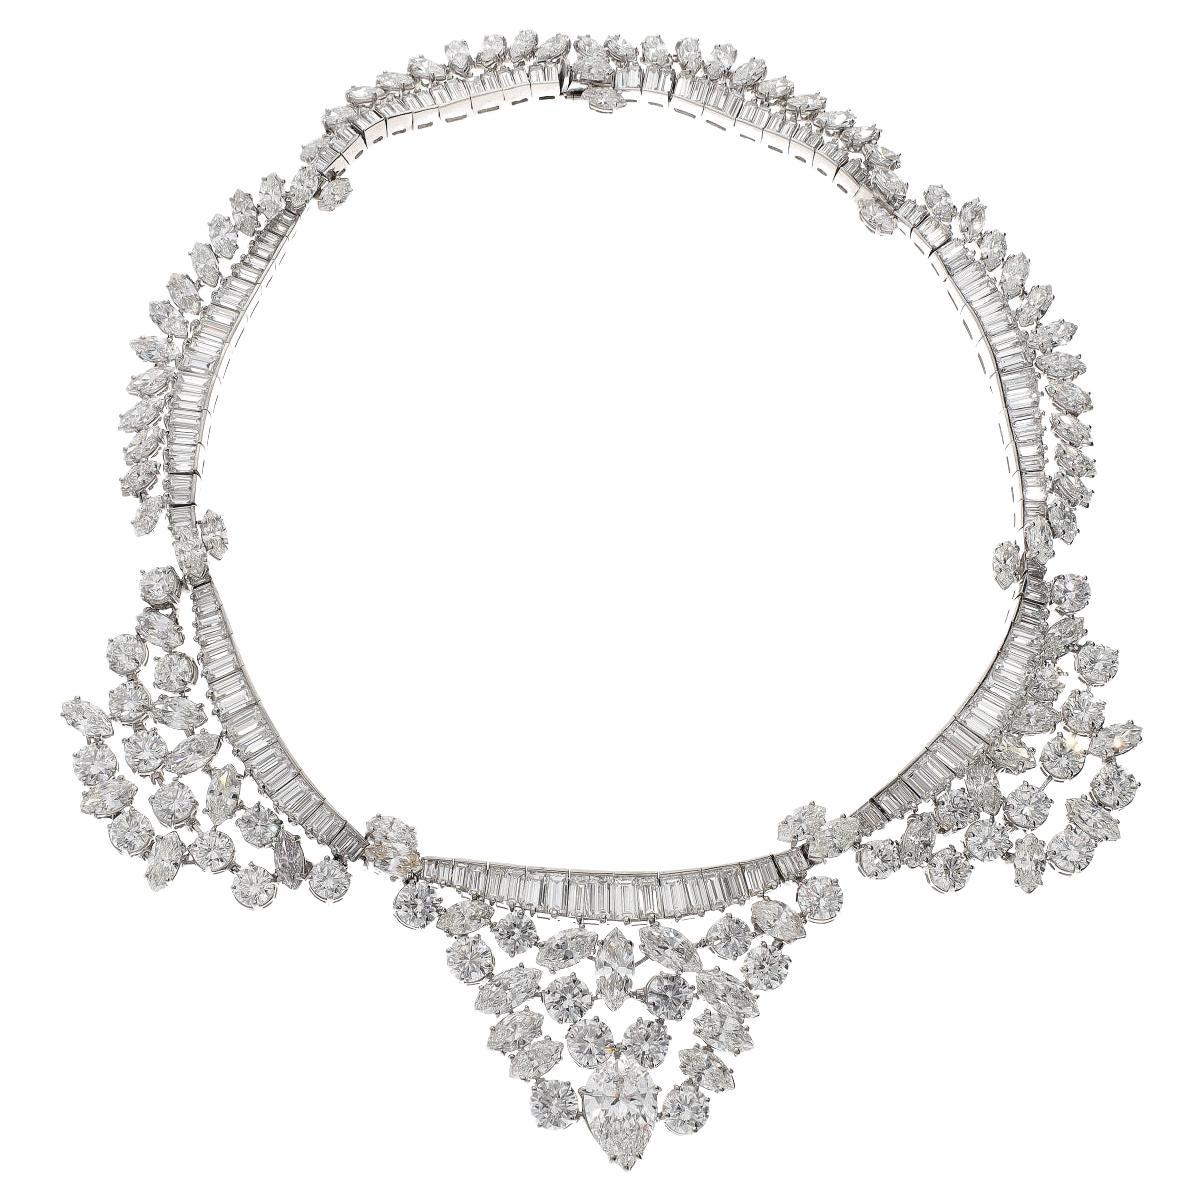 Vintage Hollywood Red Carpet 130 Carats Diamond Necklace For Sale